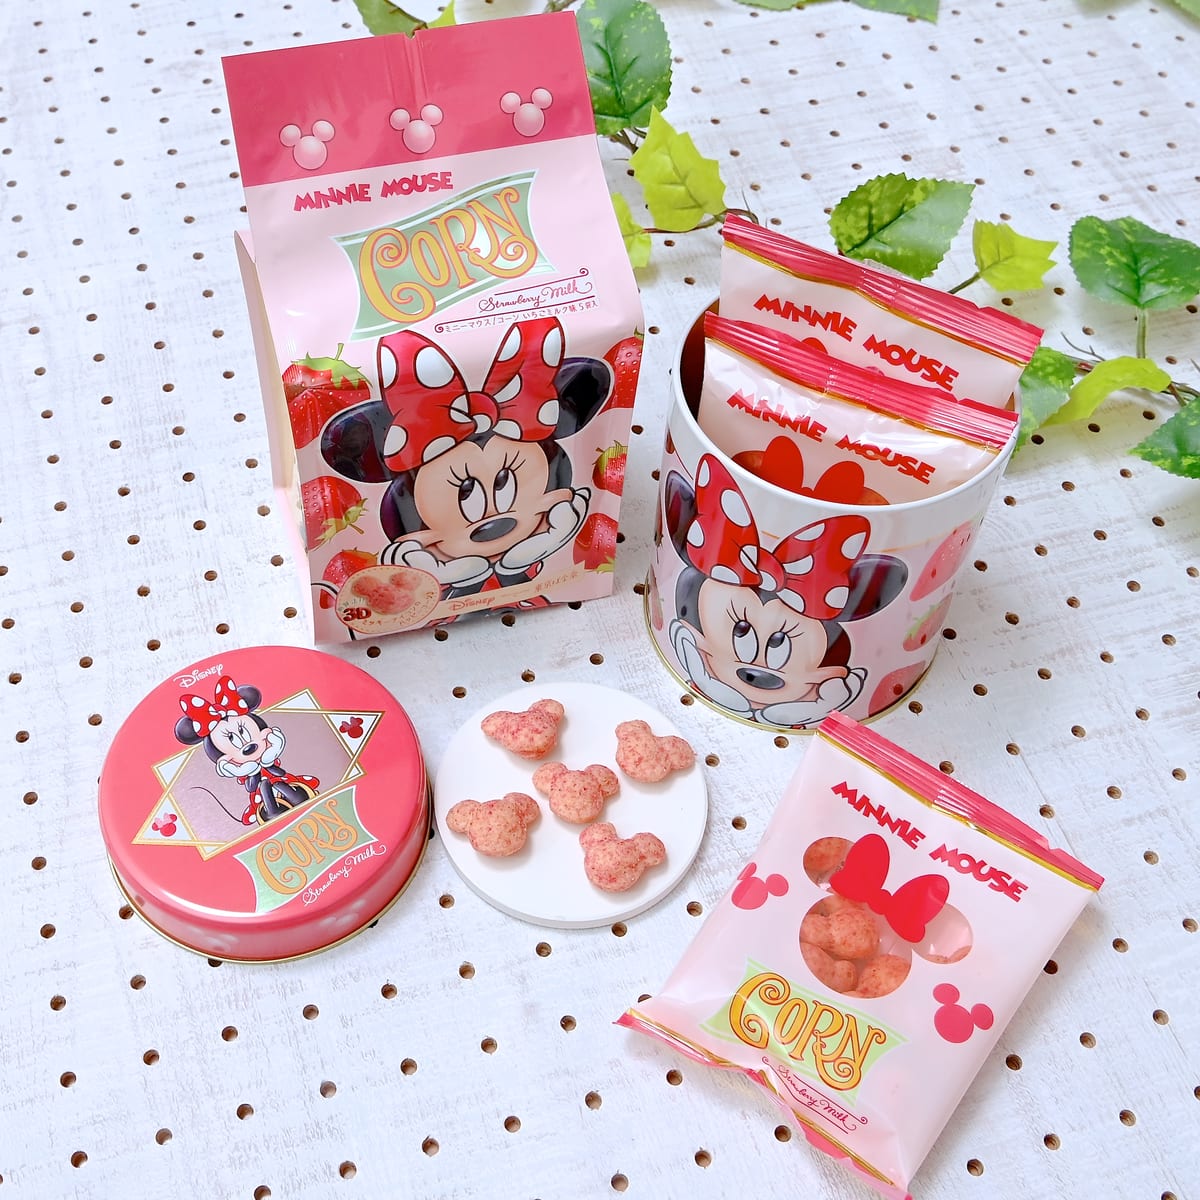 Disney SWEETS COLLECTION by 東京ばな奈『ミニーマウス/コーン いちごミルク味』